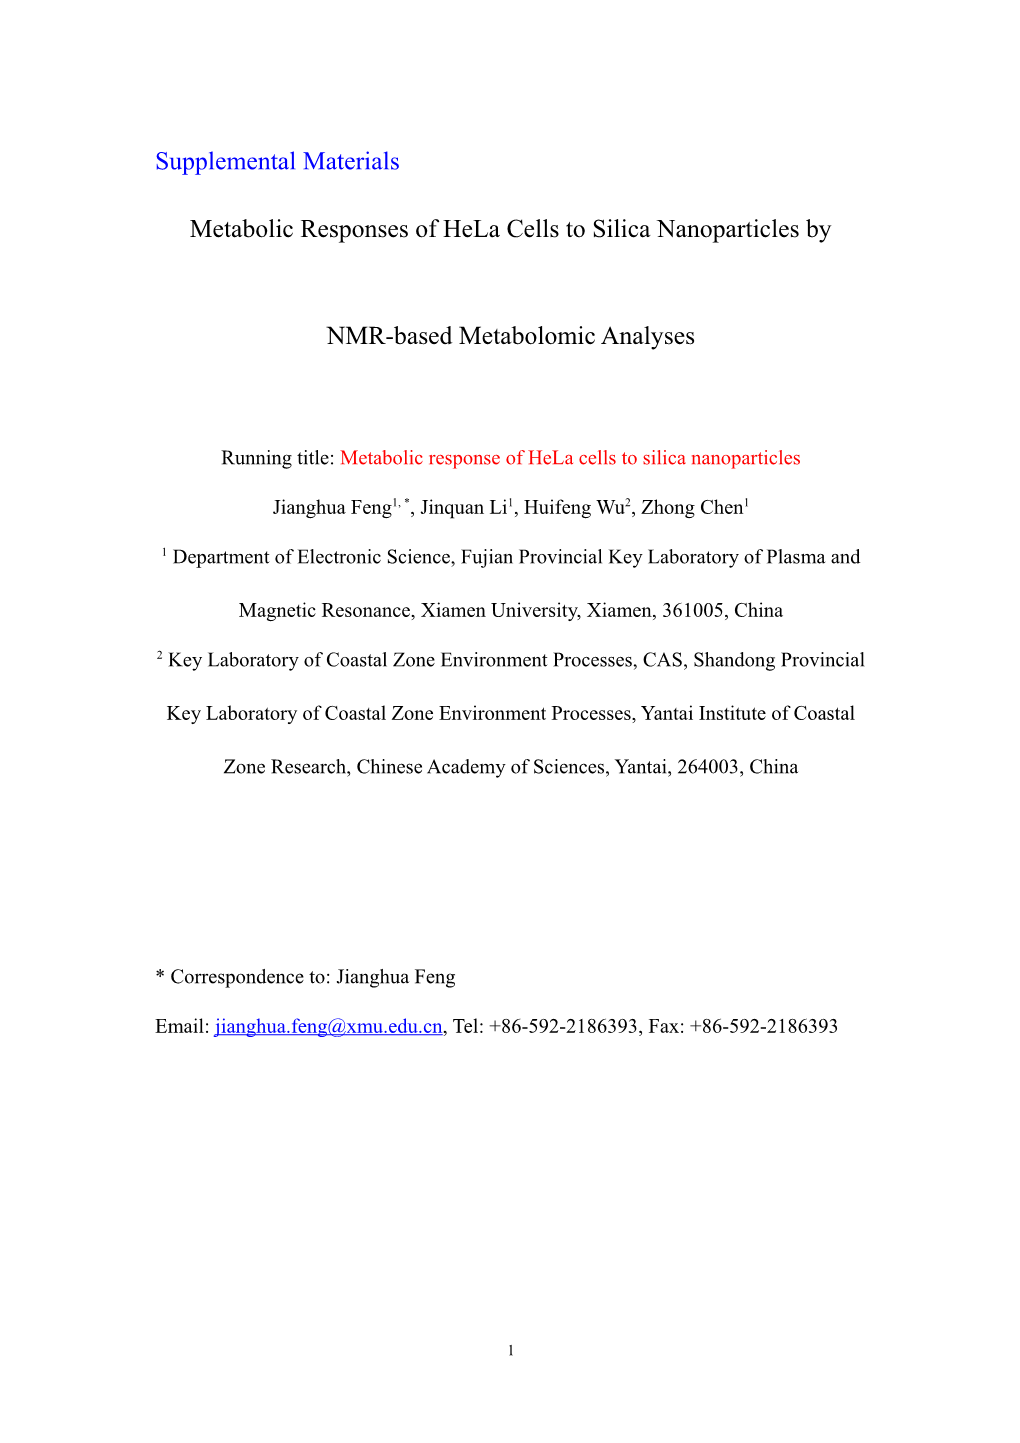 Metabolic Responses of Hela Cells to Silica Nanoparticles by NMR-Based Metabolomic Analyses